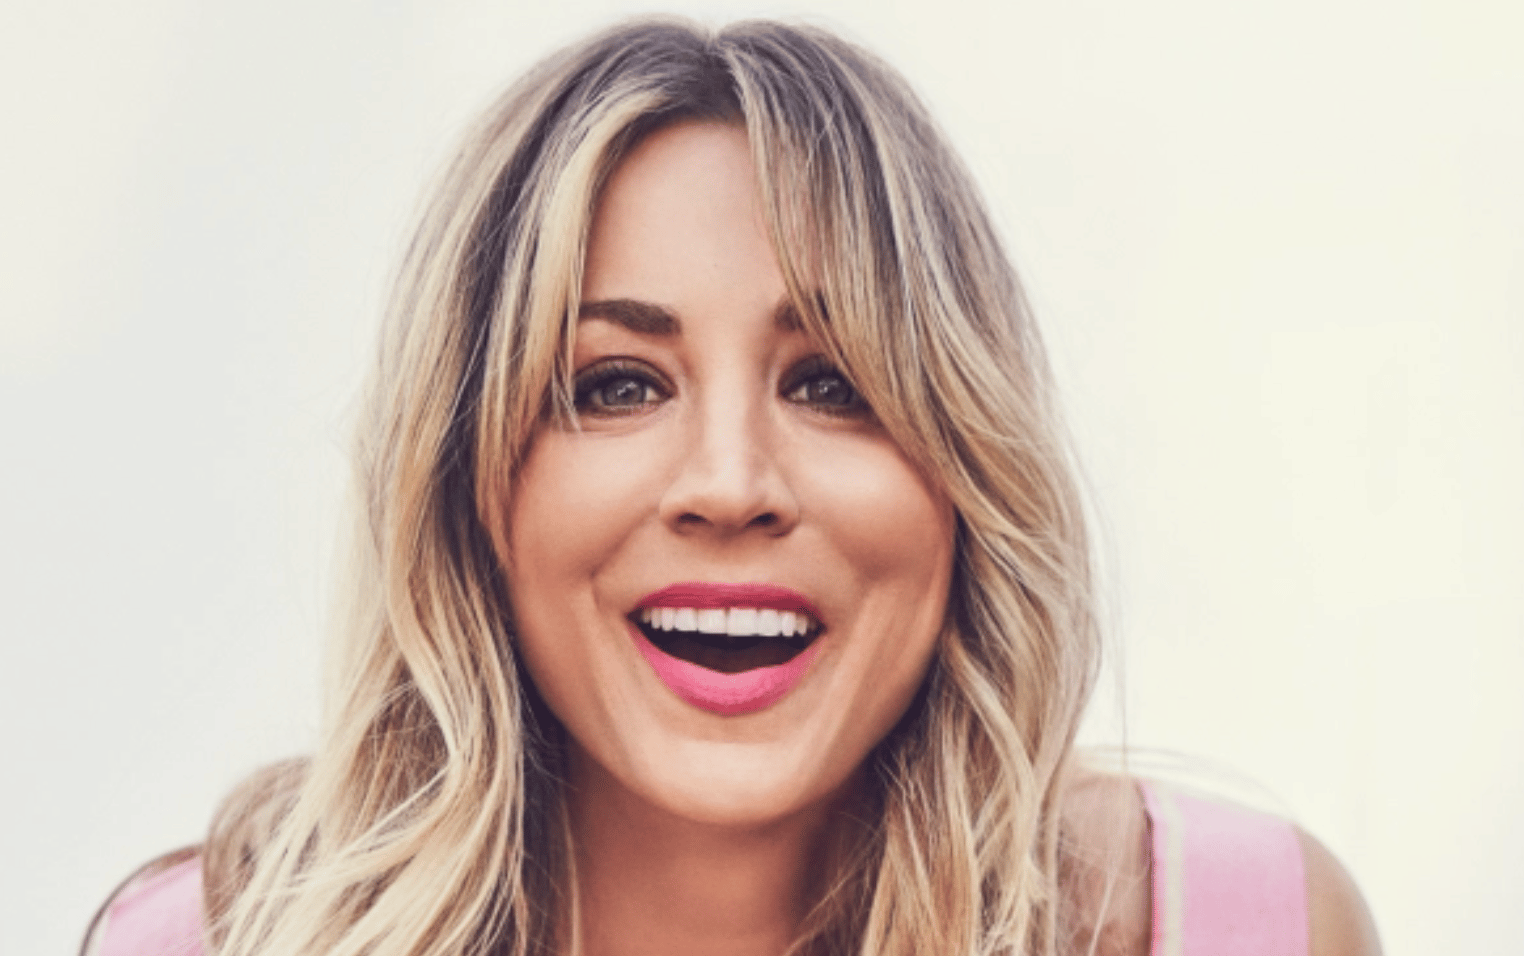 Kaley Cuoco to Lead ‘Based on a True Story’ Comedic Thriller at Peacock